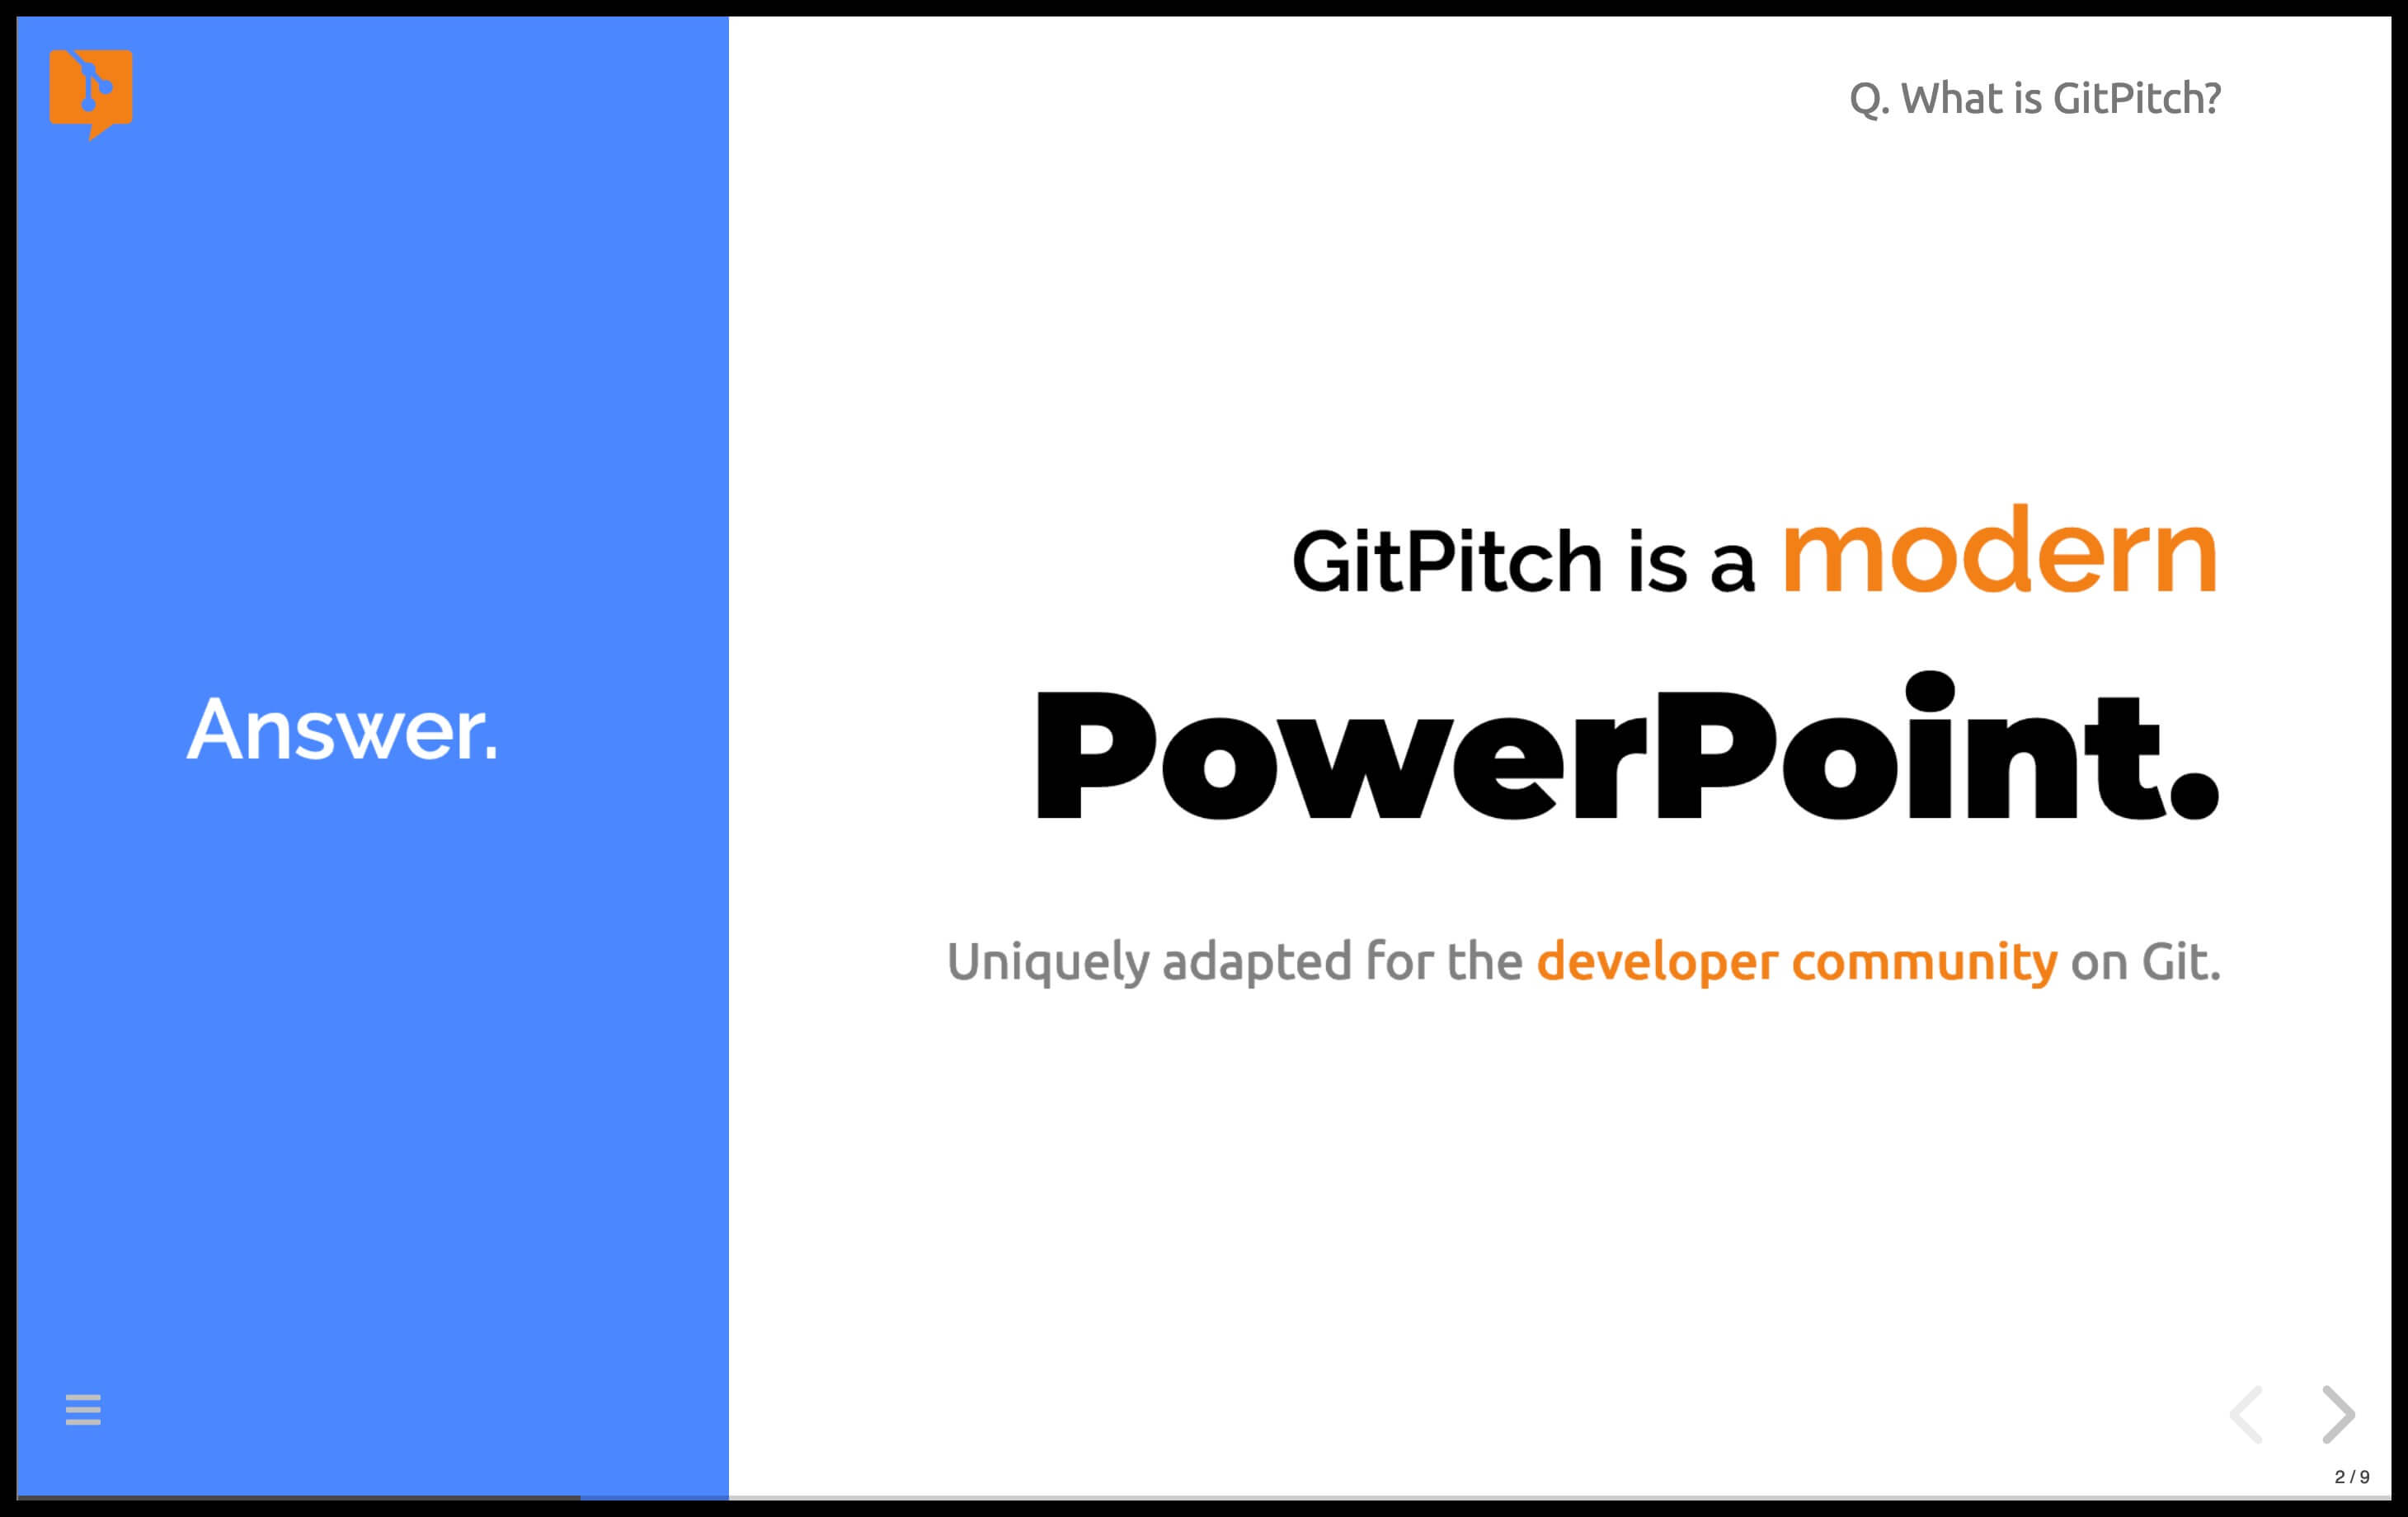 WHAT IS GITPITCH